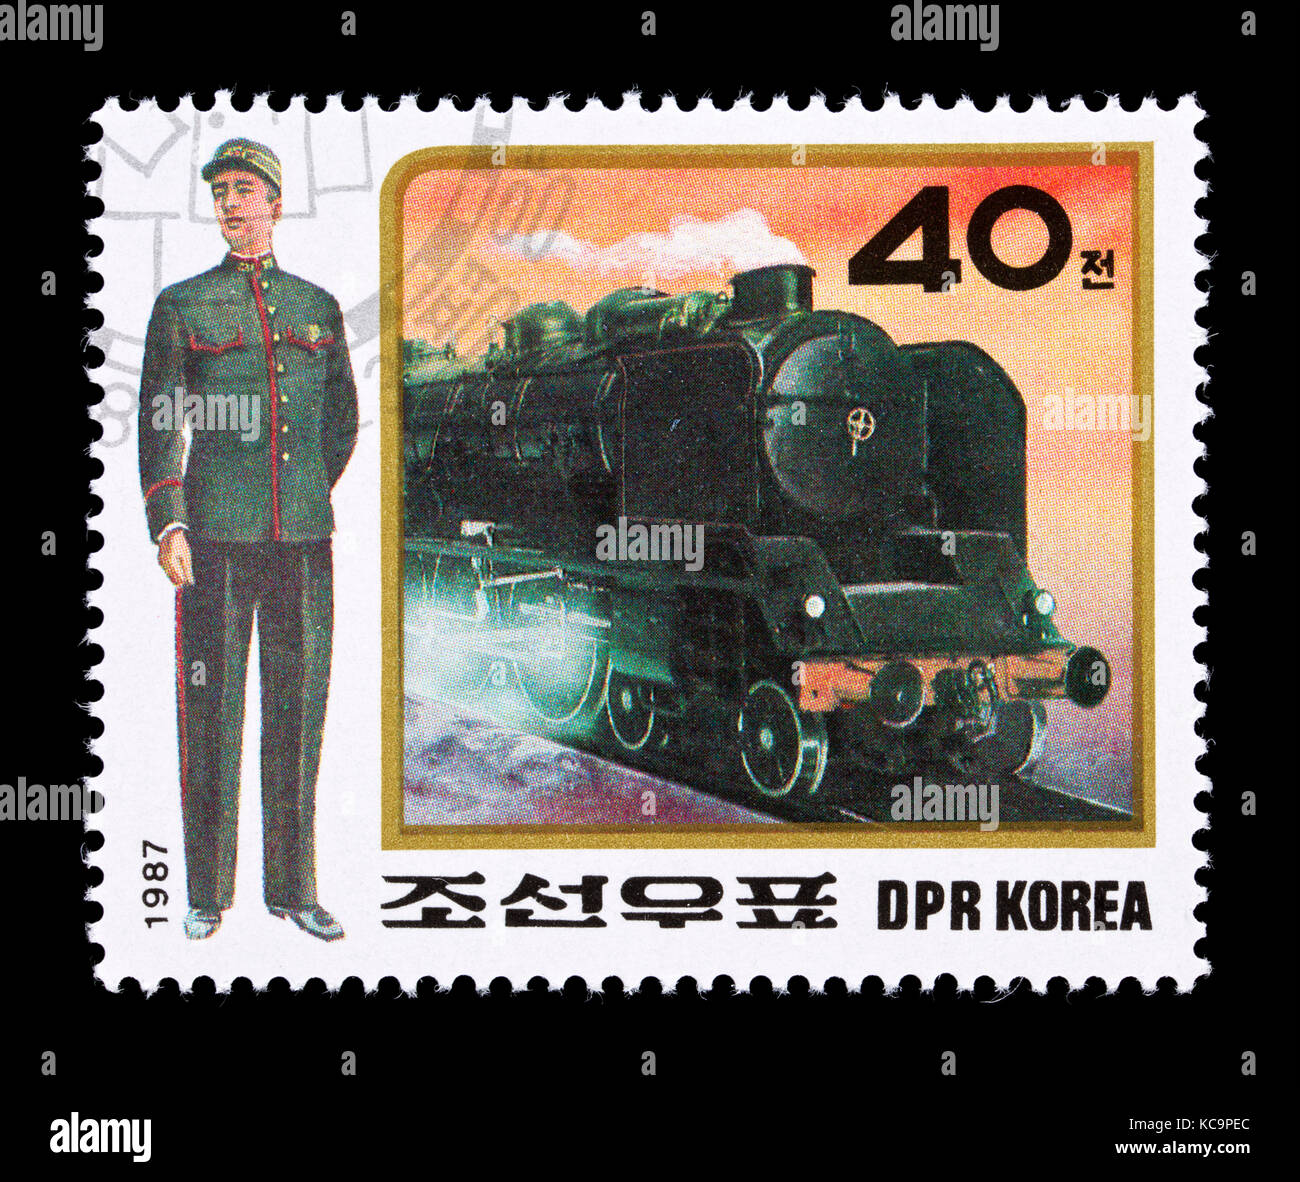 Postage stamp from North Korea depicting the Orient Express train and conductor in uniform. Stock Photo